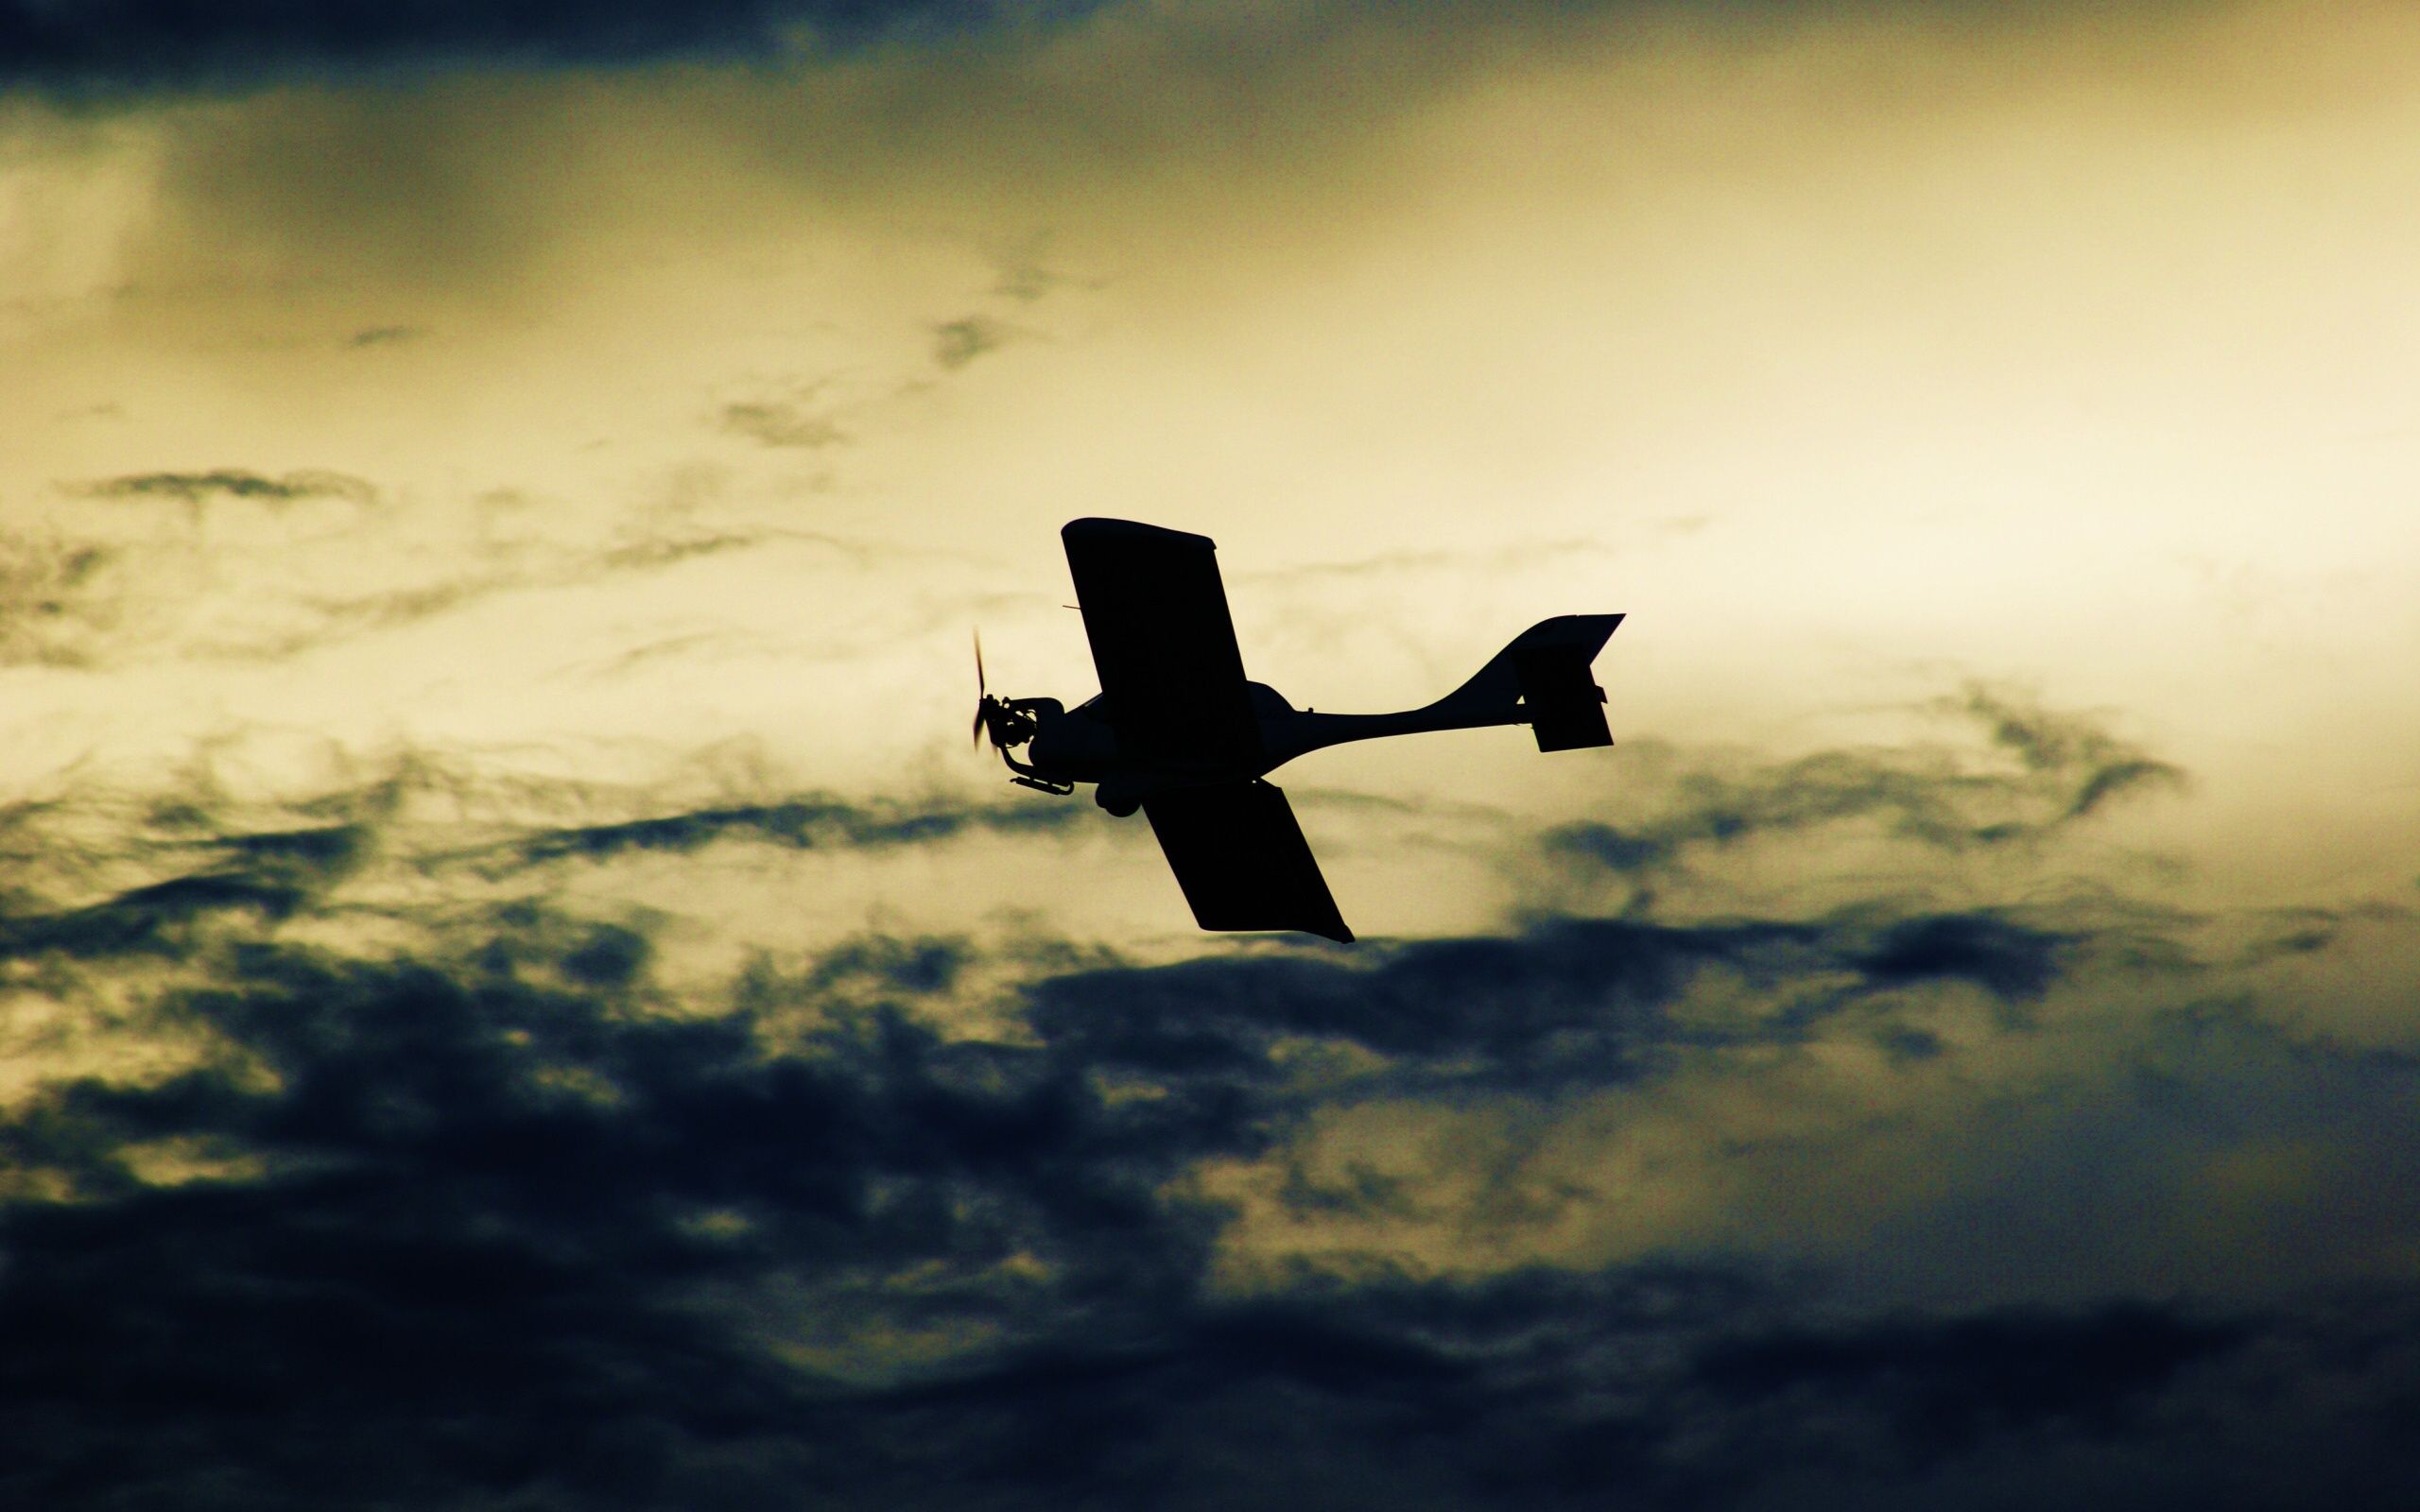 An airplane in the sky wallpapers and images - wallpapers ...